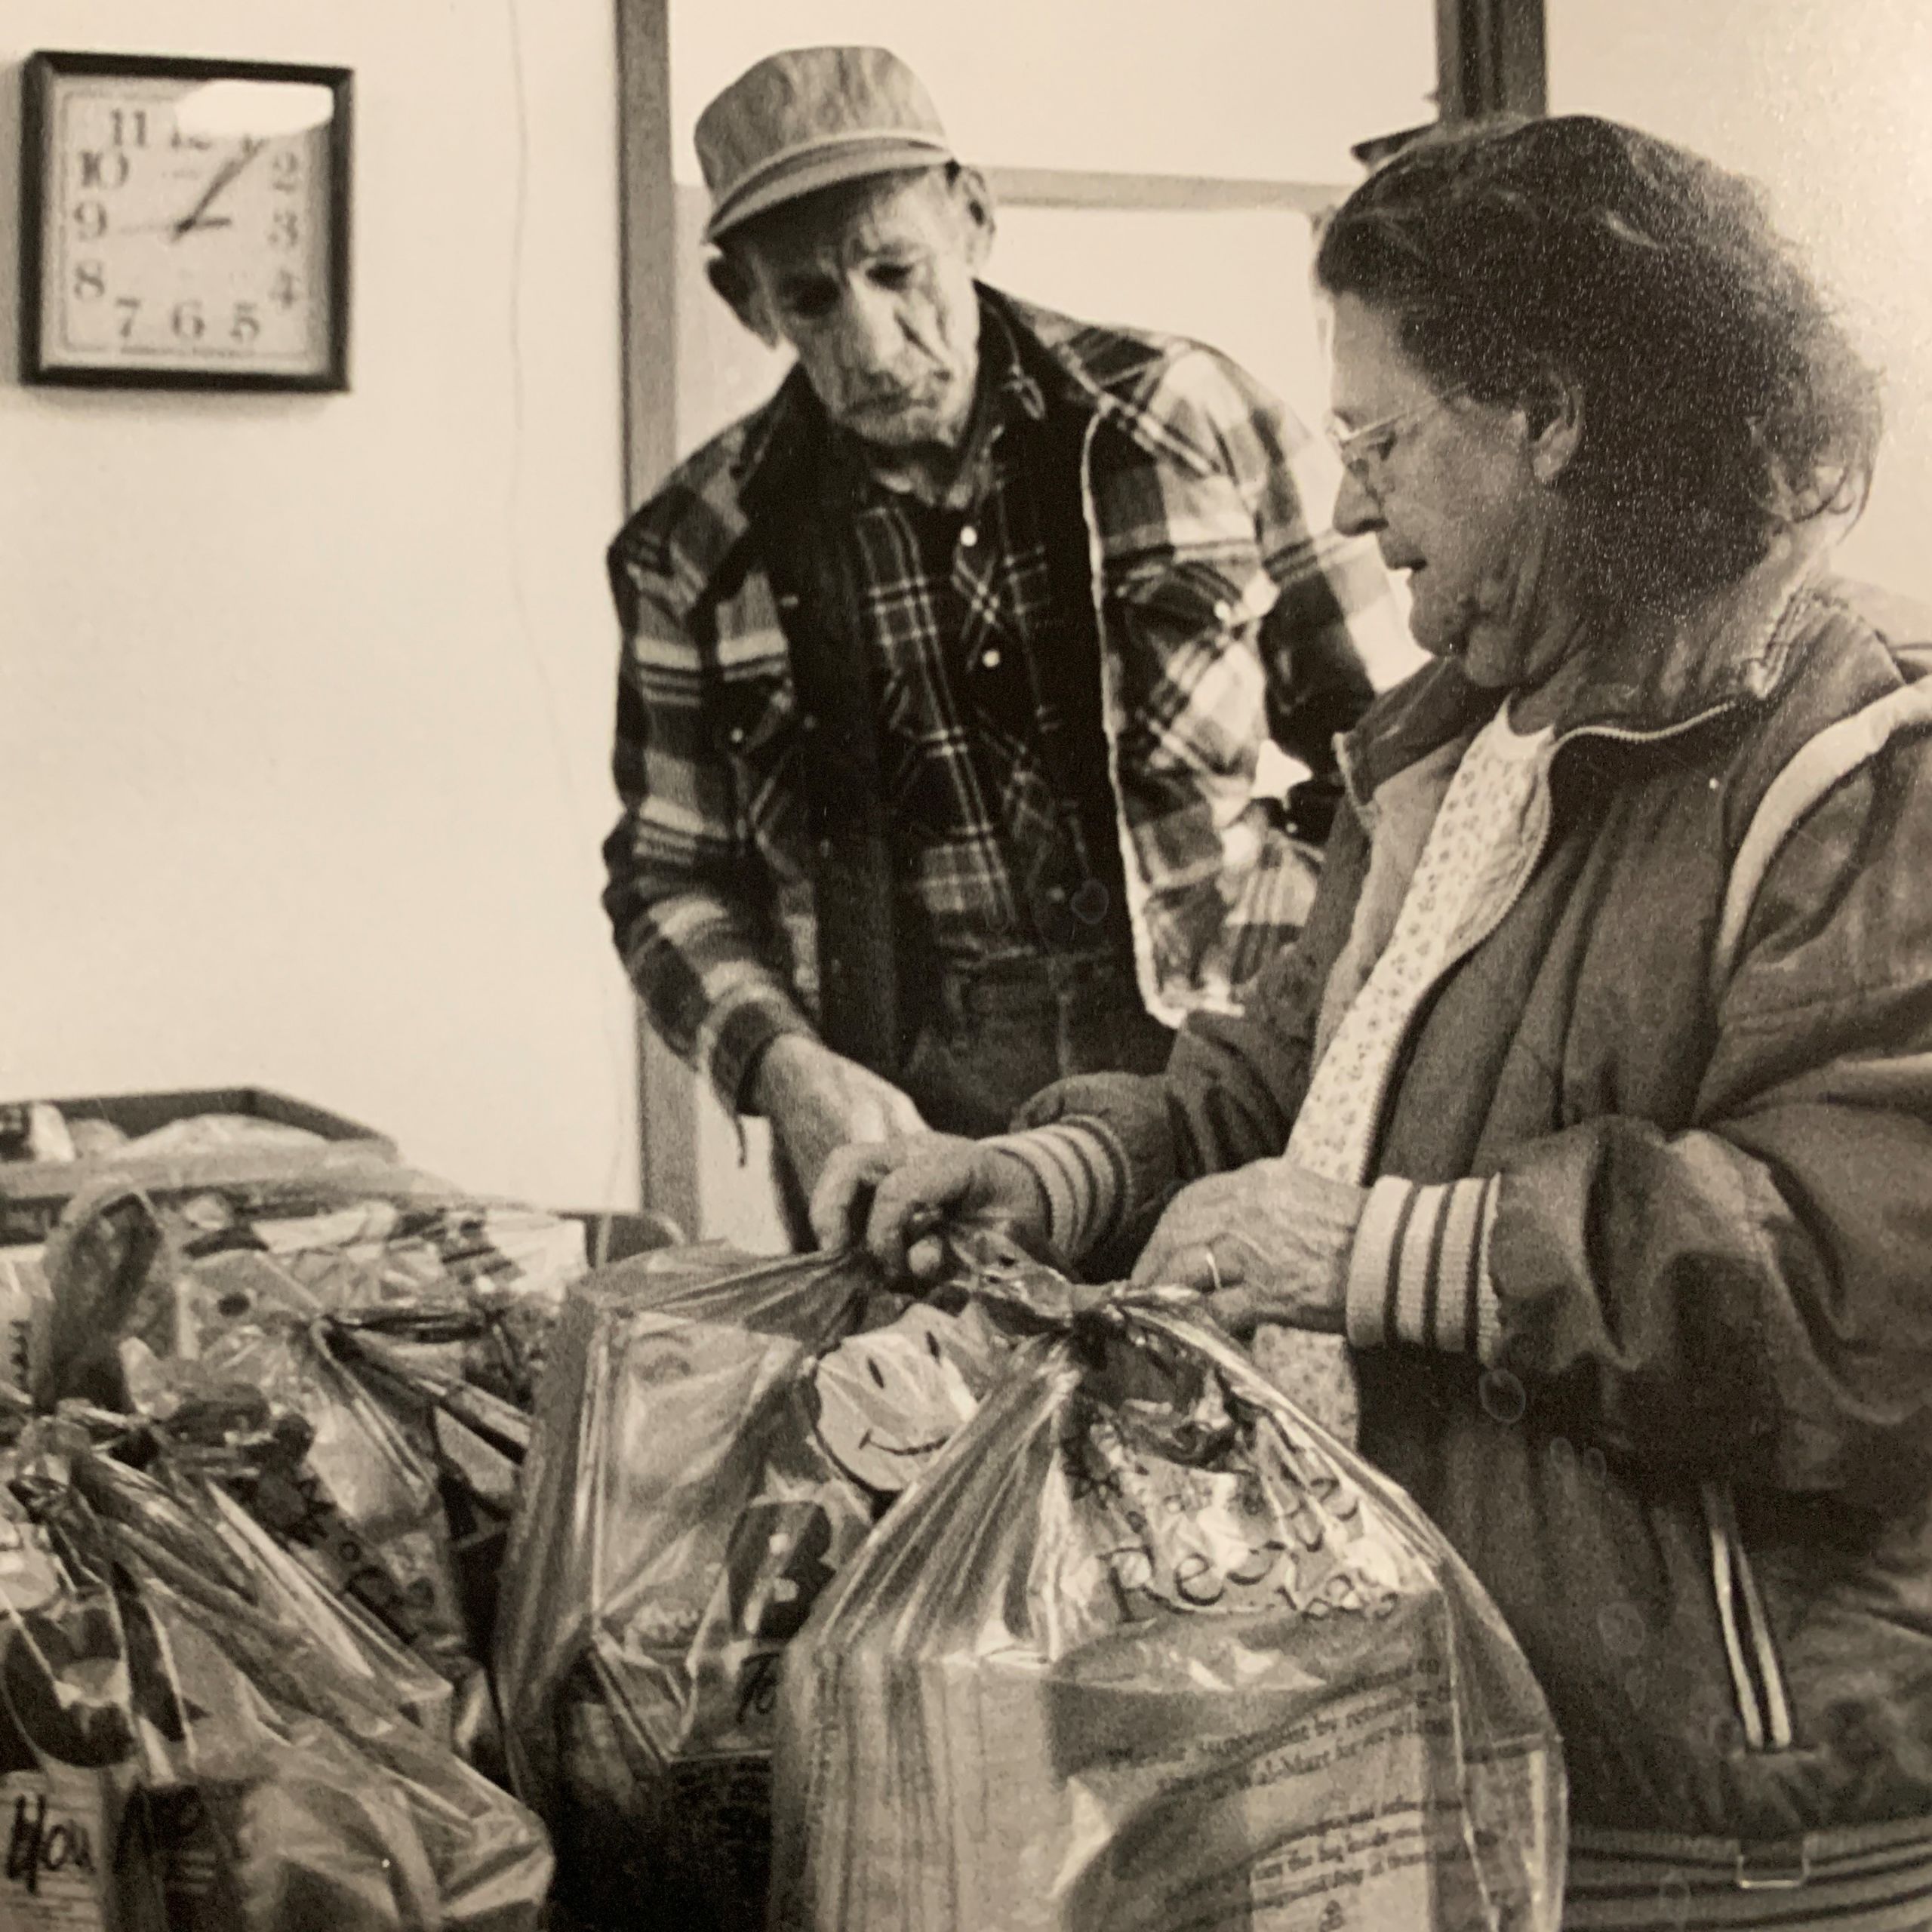 Two seniors collect food from a food pantry in the 1980s